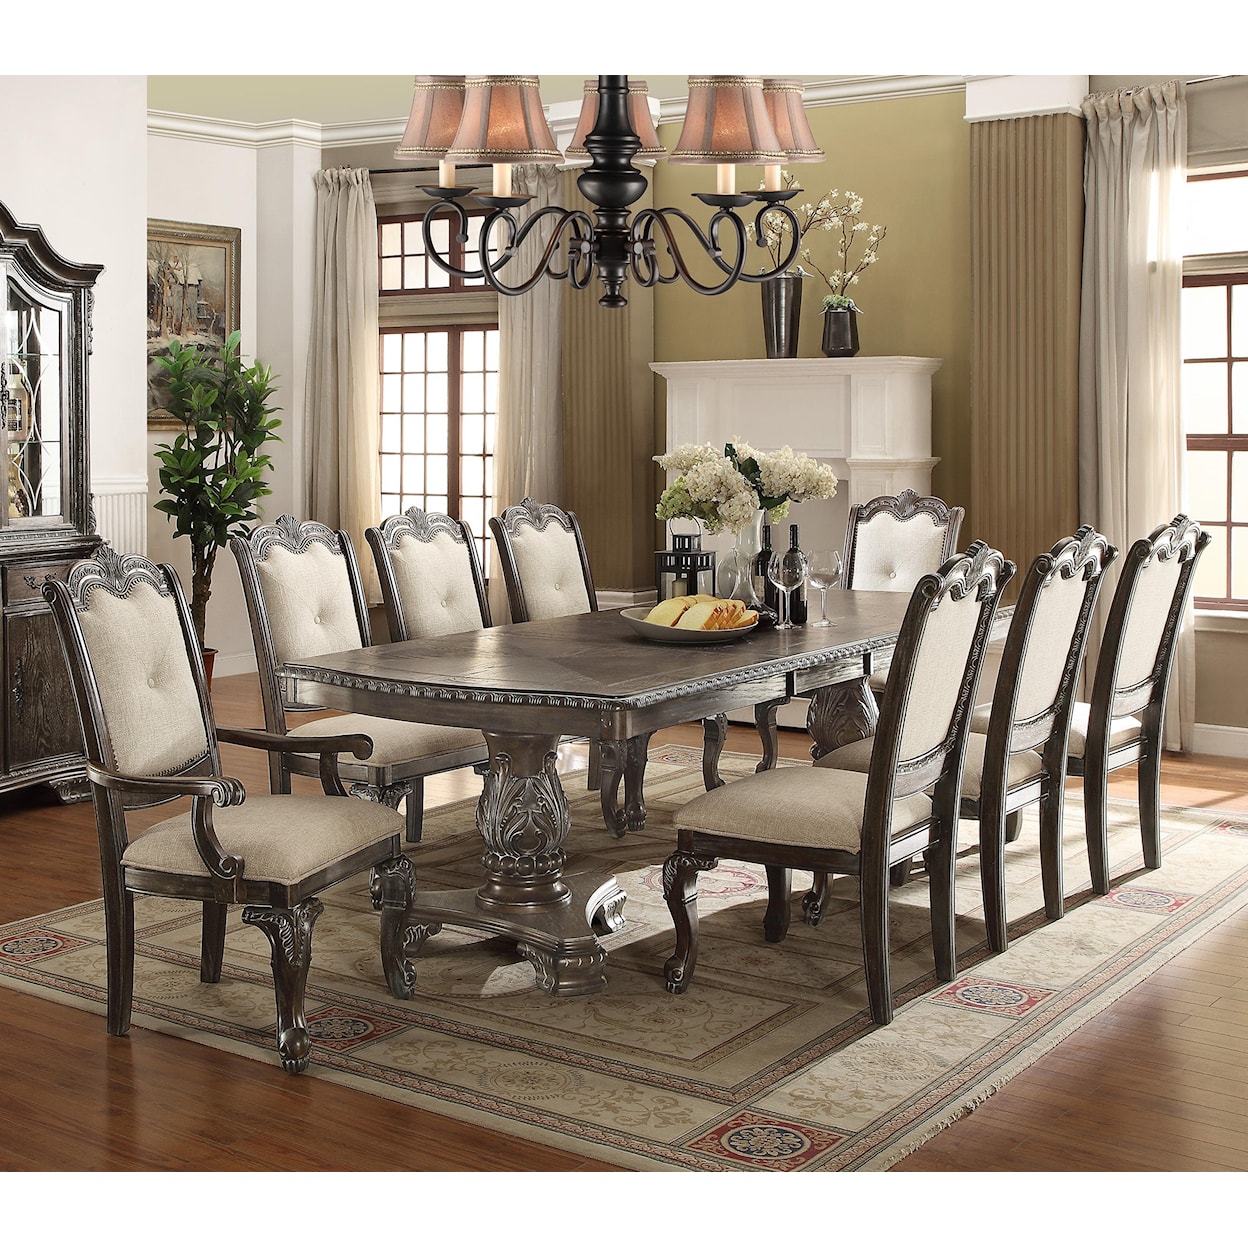 Crown Mark Kiera 7 Piece Table and Chair Set